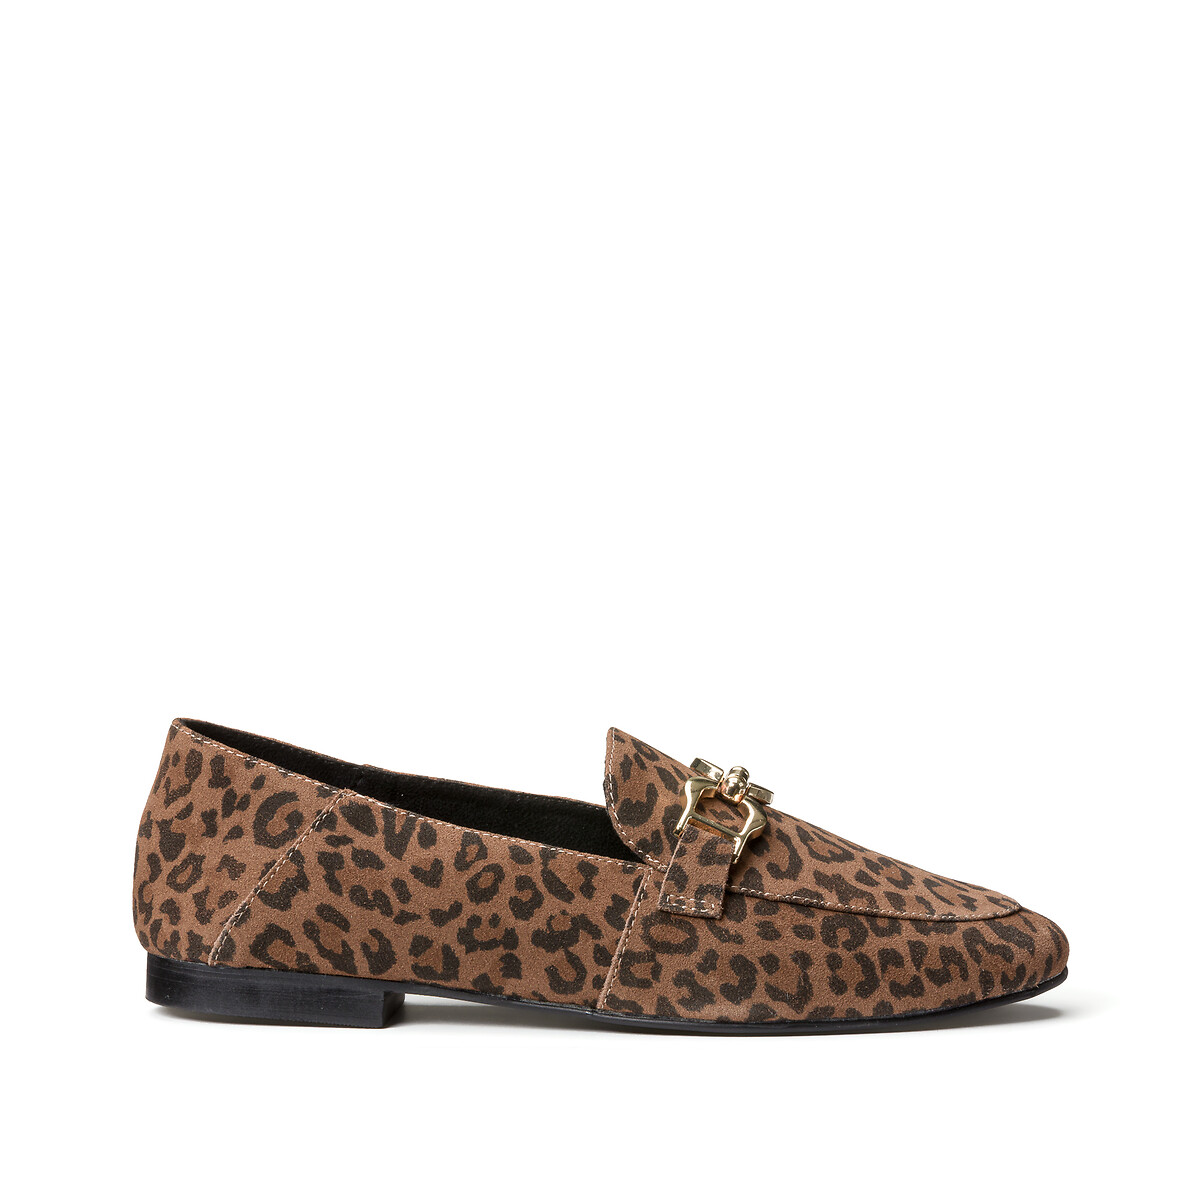 Wide Fit Suede Loafers in Leopard Print